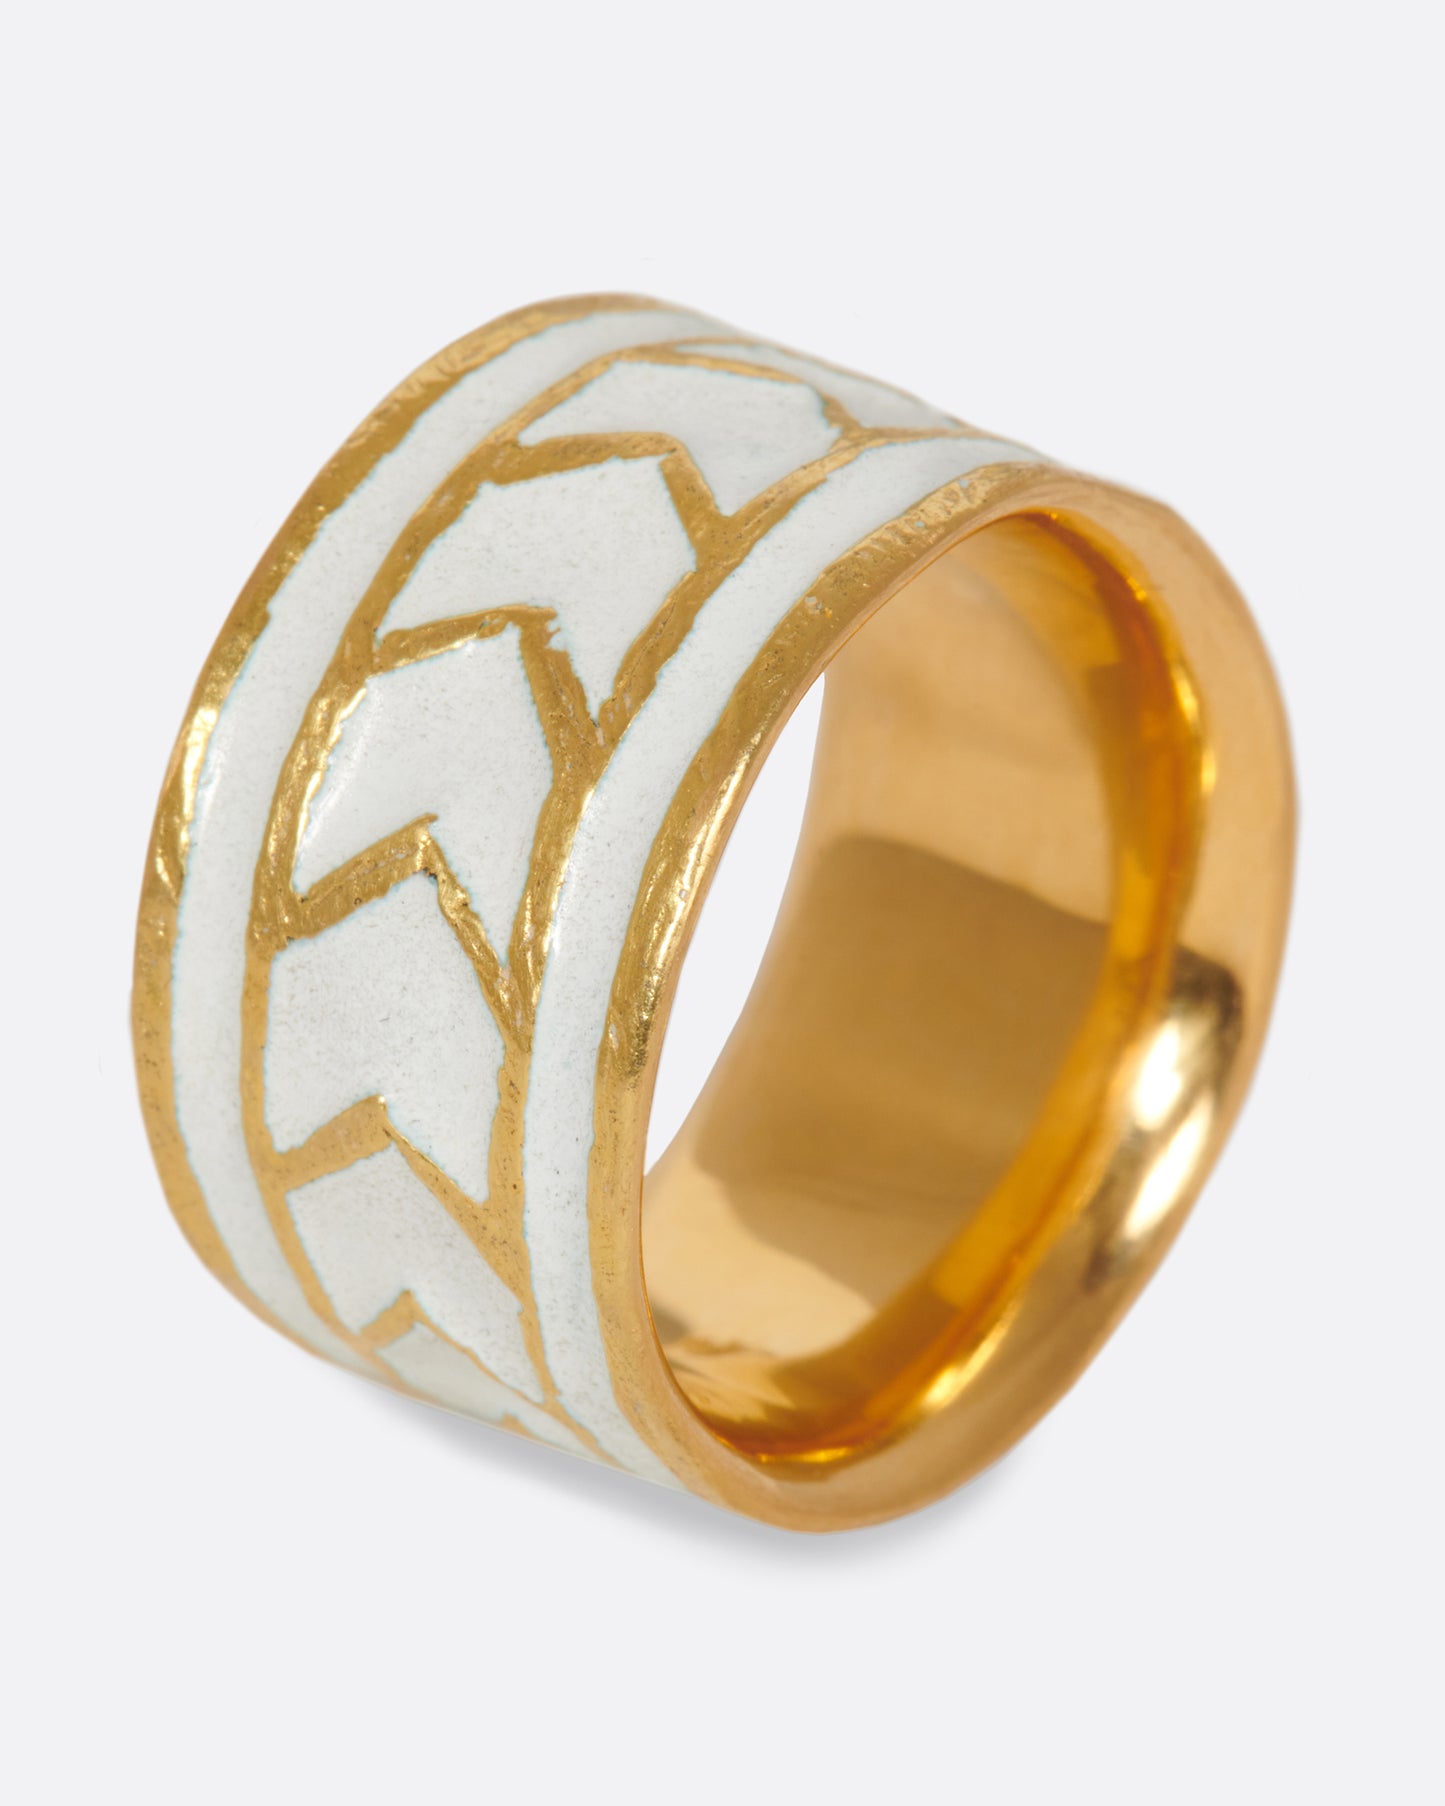 A handcrafted gold band with a path of consecutive arrows in white enamel.